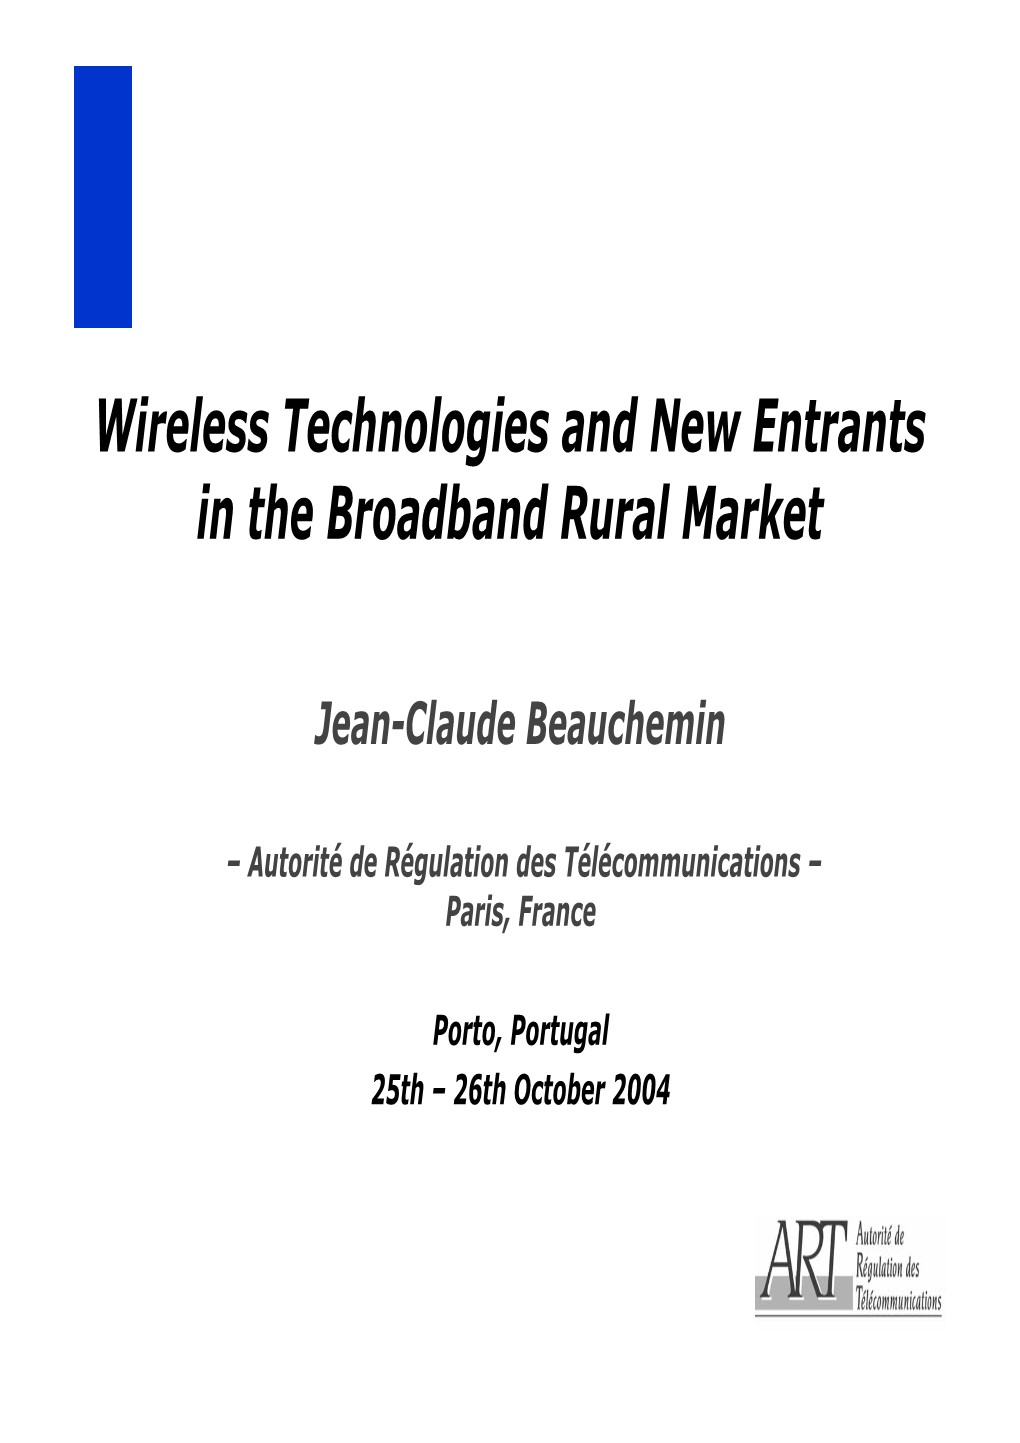 Wireless Technologies and New Entrants in the Broadband Rural Market